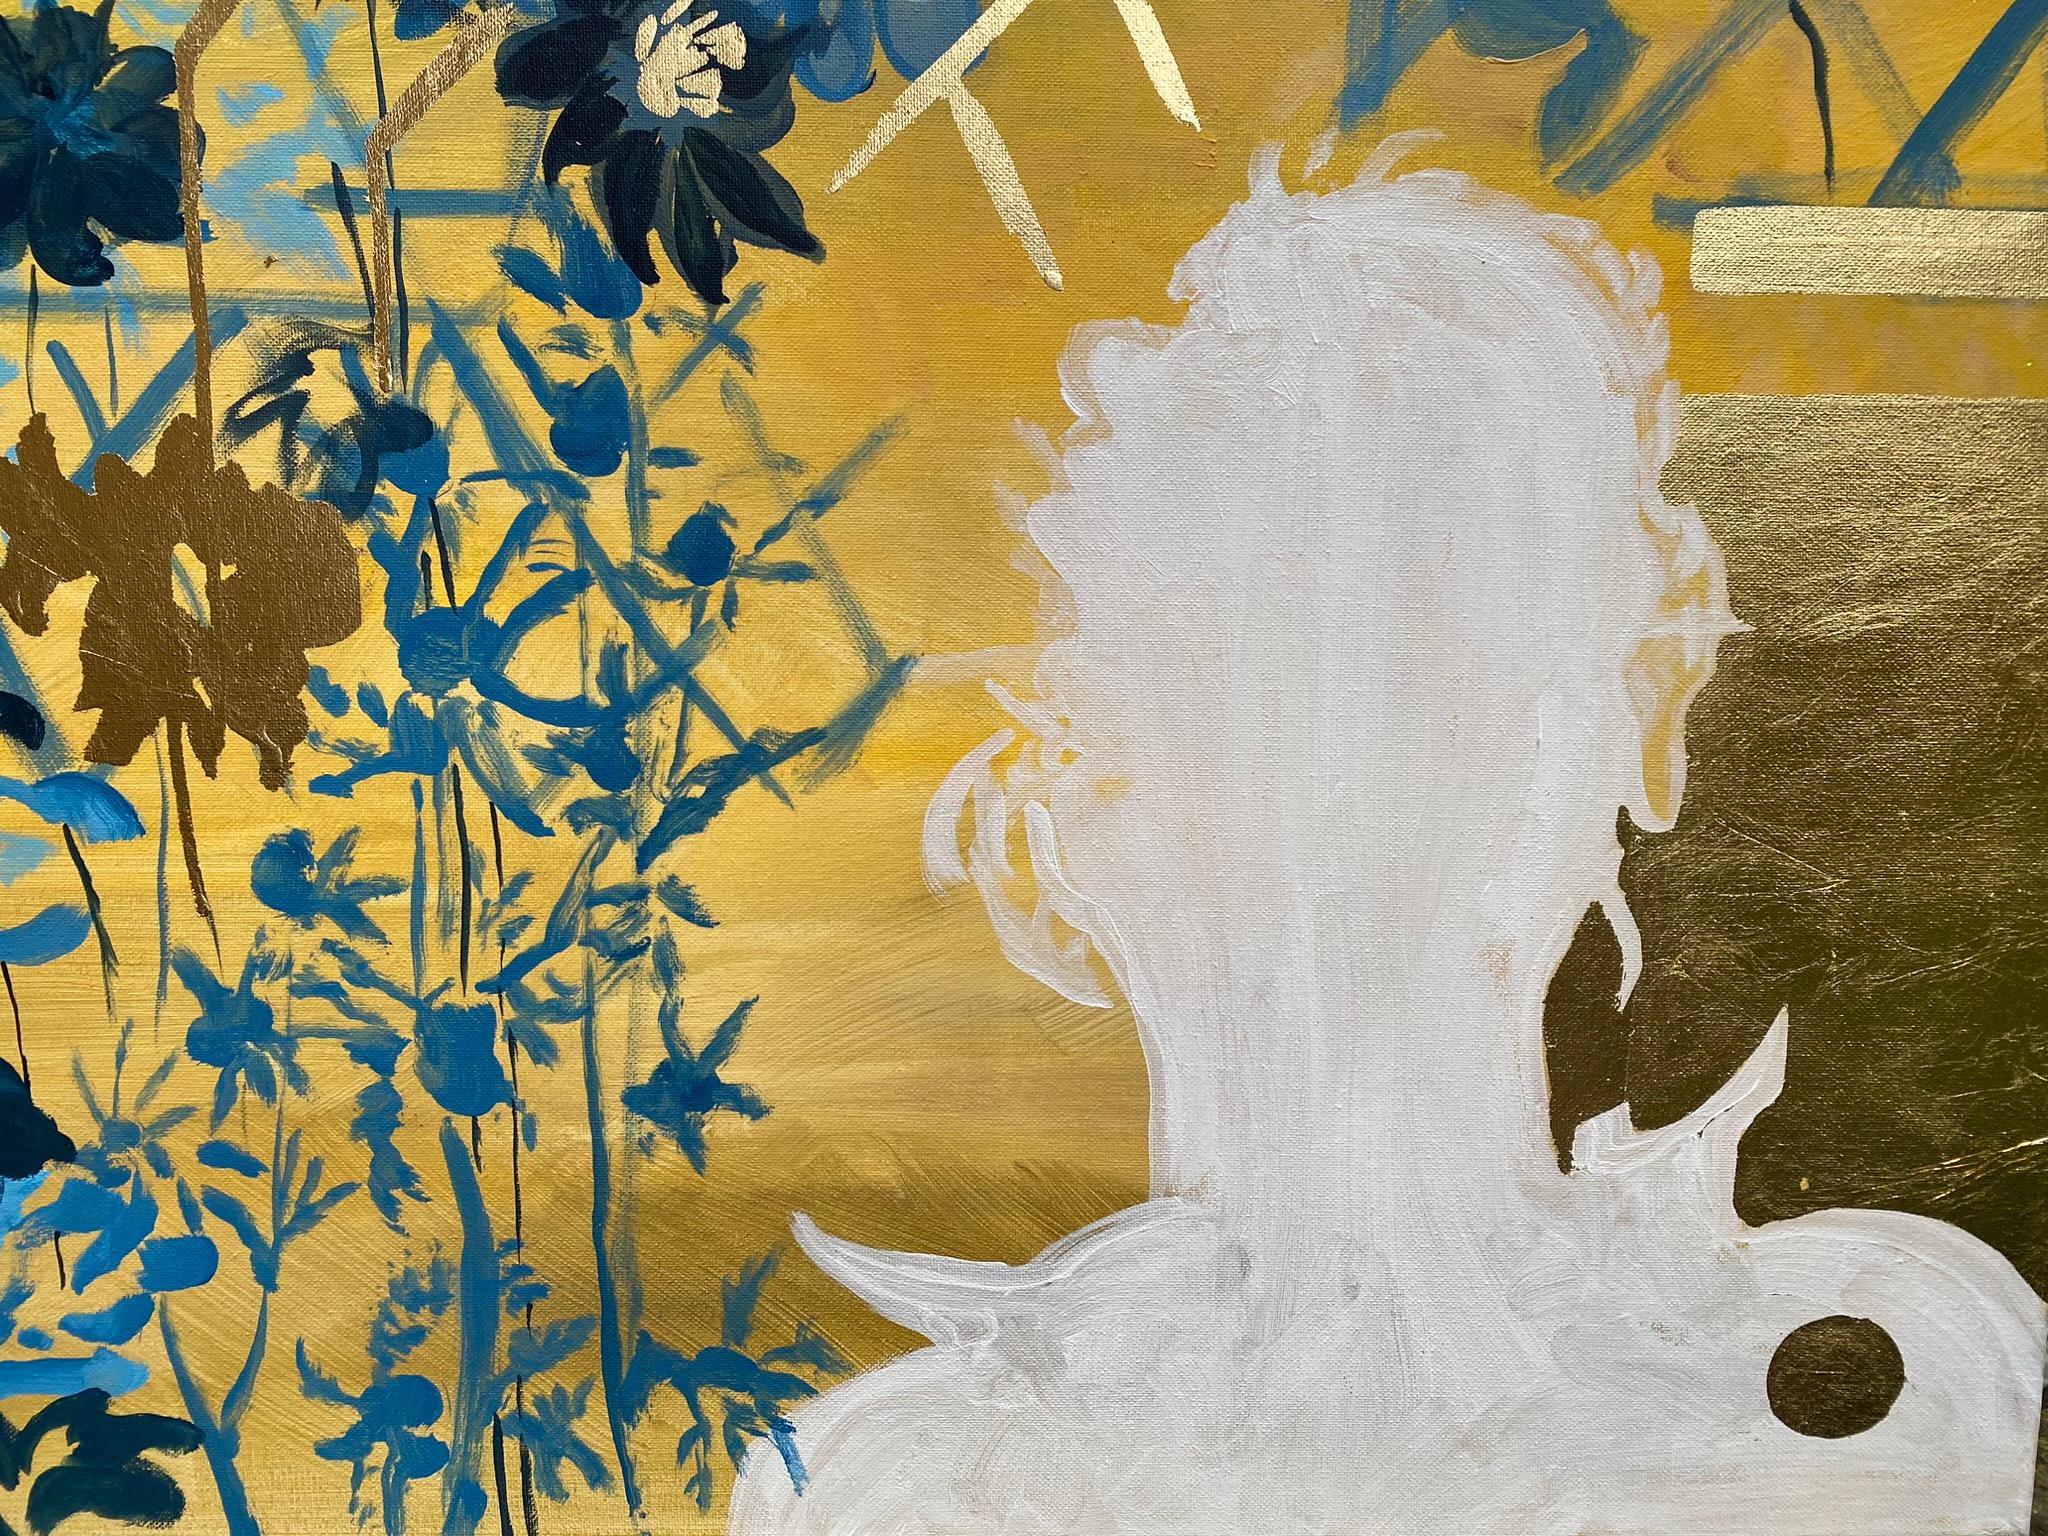 Original Large Oil painting-Constant Gardener, a portrait-Gold leaf-UK Artist - Abstract Expressionist Painting by Shizico Yi